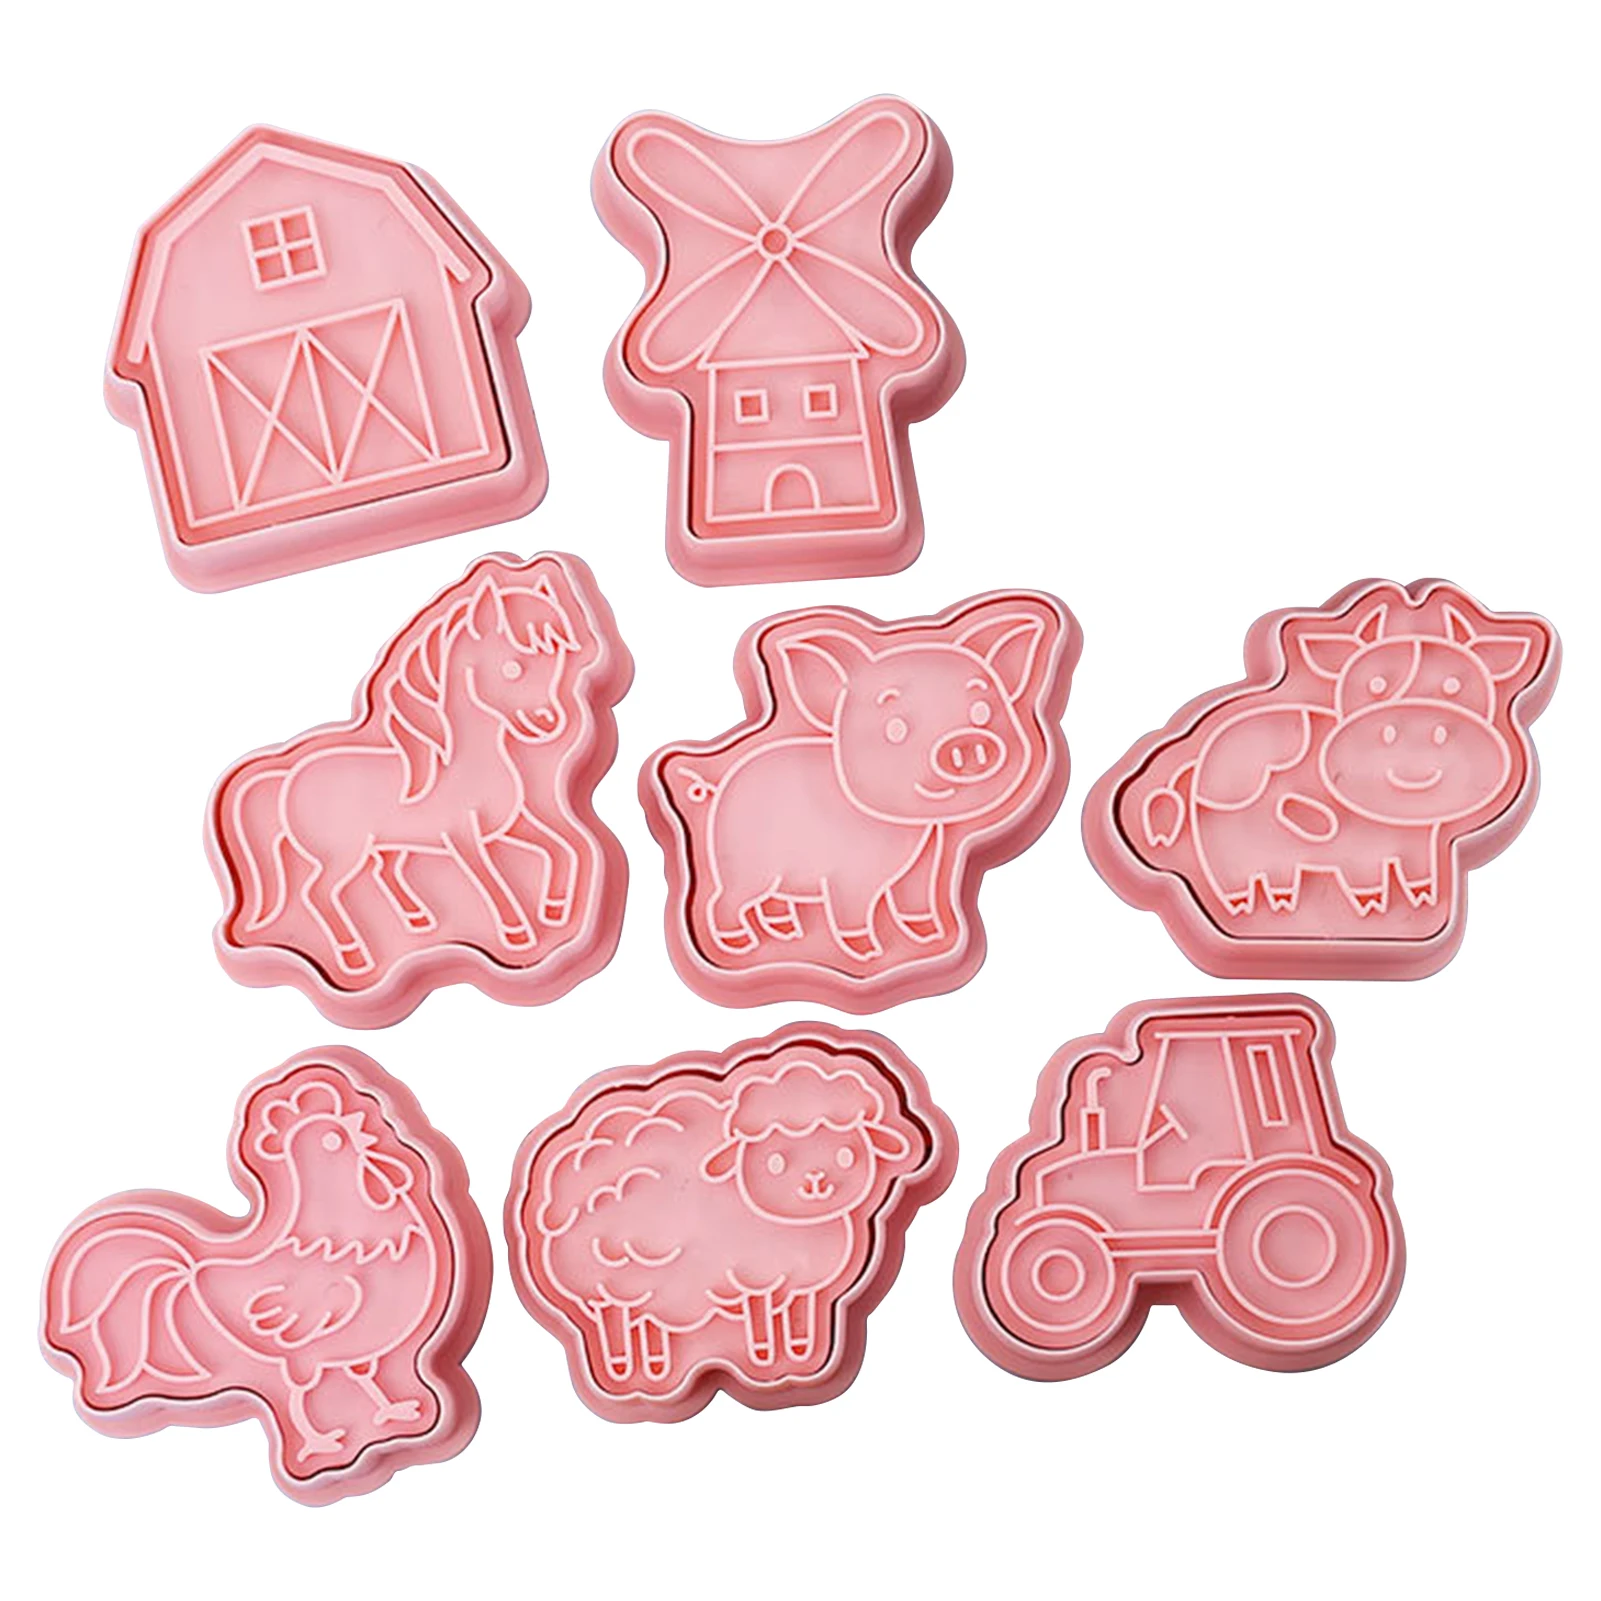 

Cookie Stamp Cutters Farmhouse Pattern Biscuit Cutter Molds 8pcs Funny Cartoon Cookie Stamps Embossing Cutters For Biscuit